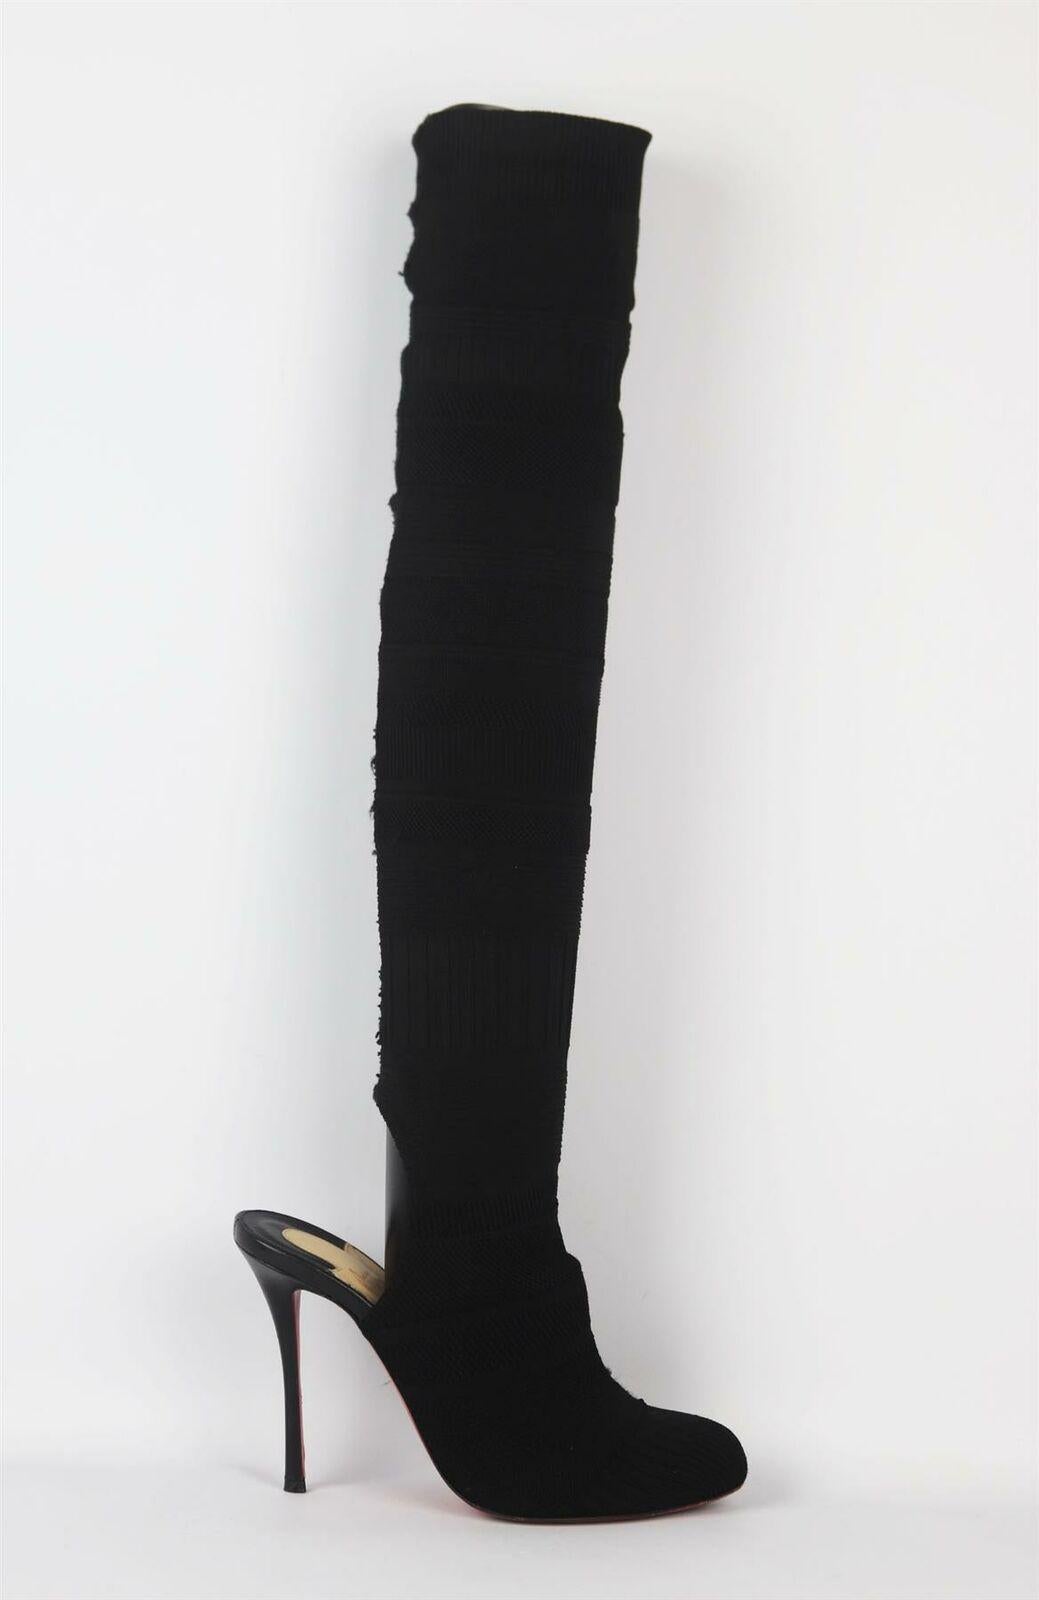 Christian Louboutin understands what it takes to make a woman's foot look amazing, and these knee-high stretch-knit boots are designed for a flattering sock-like fit, this round-toe pair sits on a sky-high 100mm stiletto heel and has a cutout